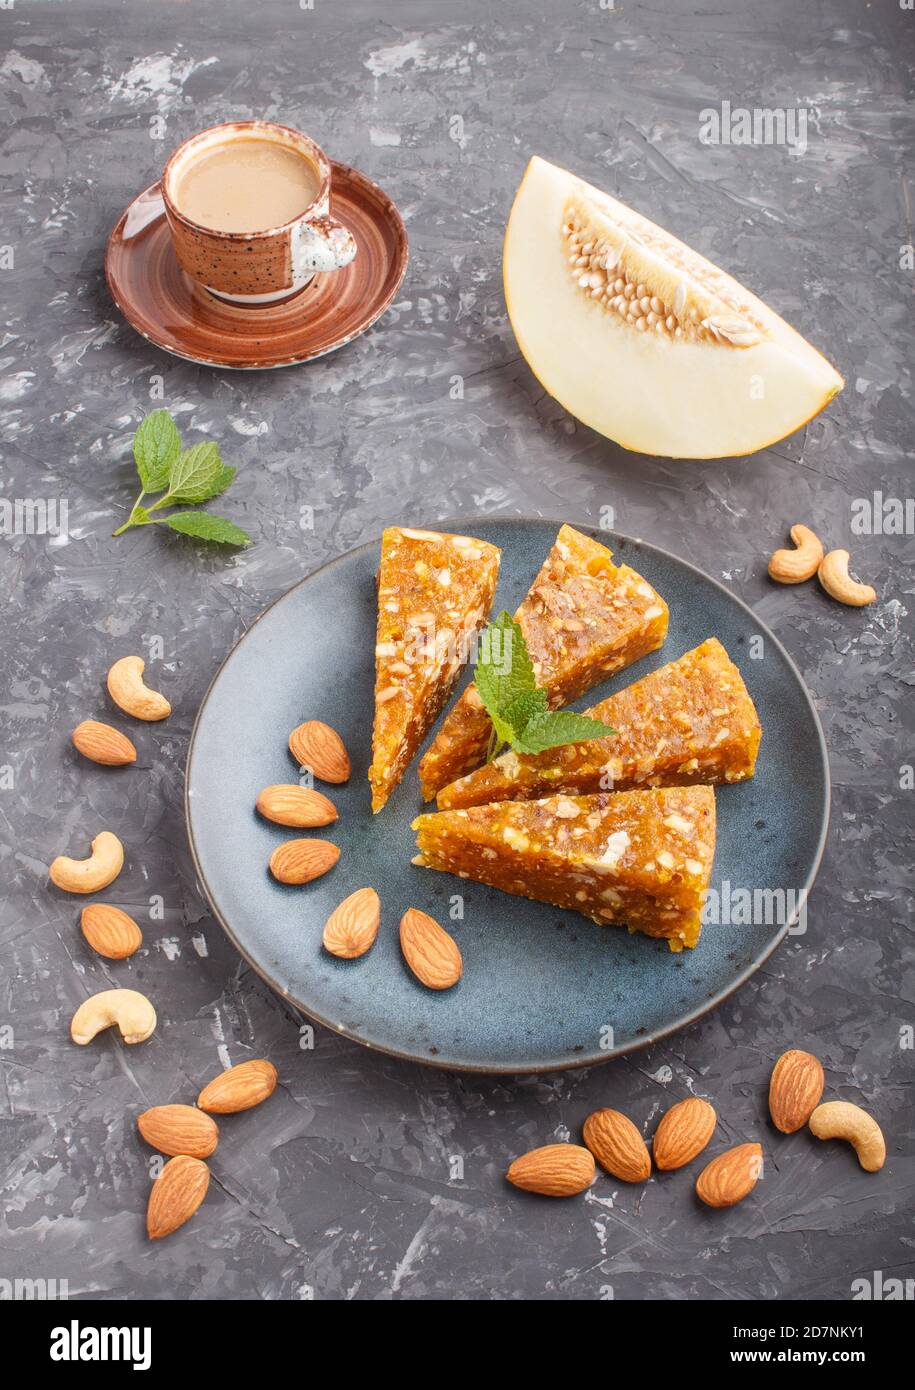 Traditional turkish candy cezerye made from caramelised melon, roasted walnuts, hazelnuts, cashew, pistachios in blue ceramic plate and a cup of coffe Stock Photo